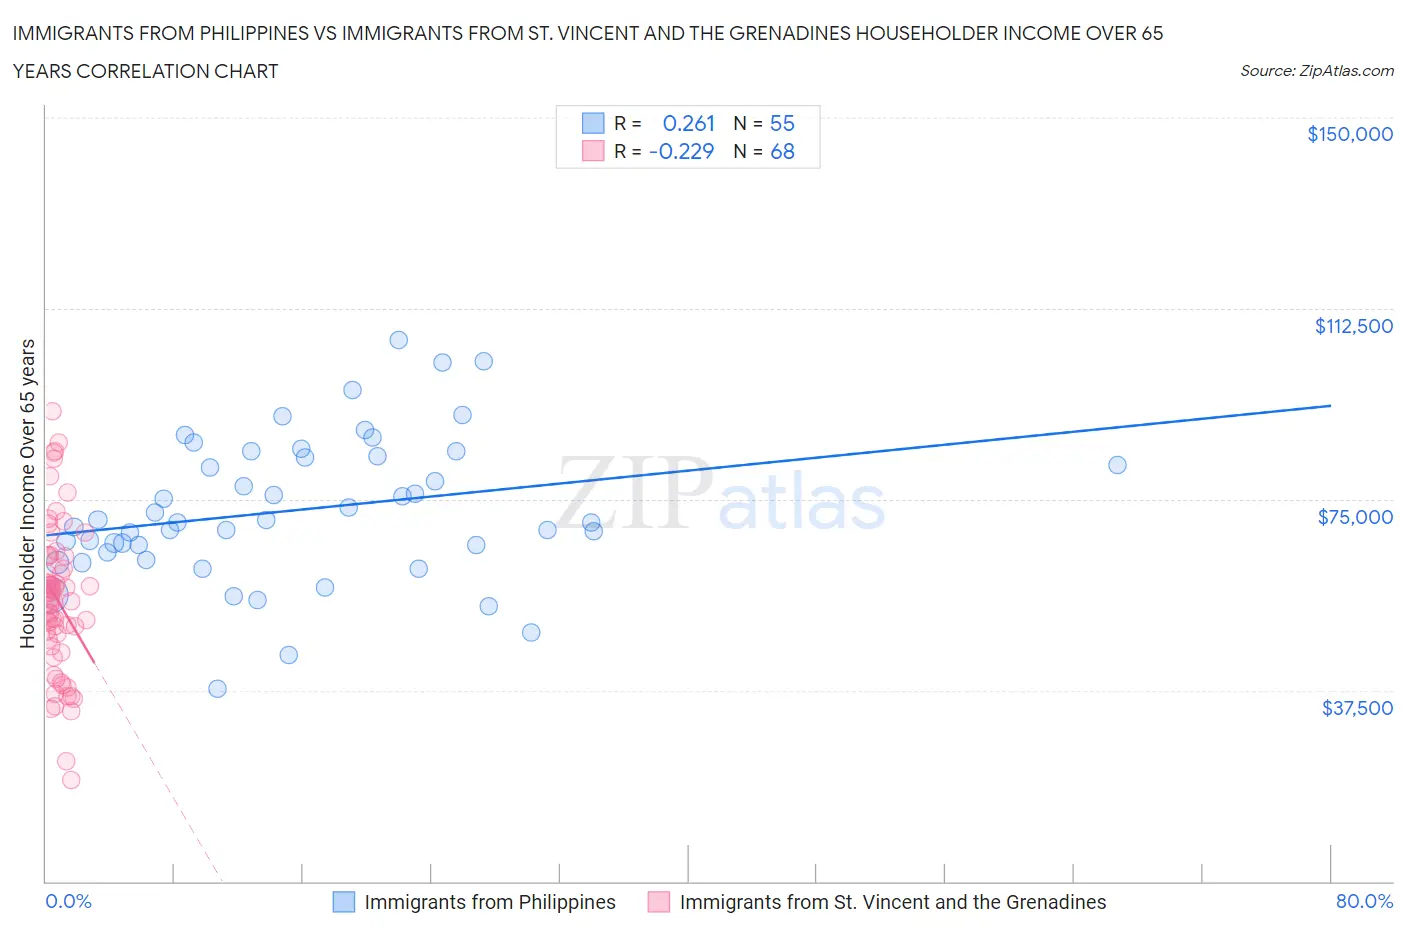 Immigrants from Philippines vs Immigrants from St. Vincent and the Grenadines Householder Income Over 65 years